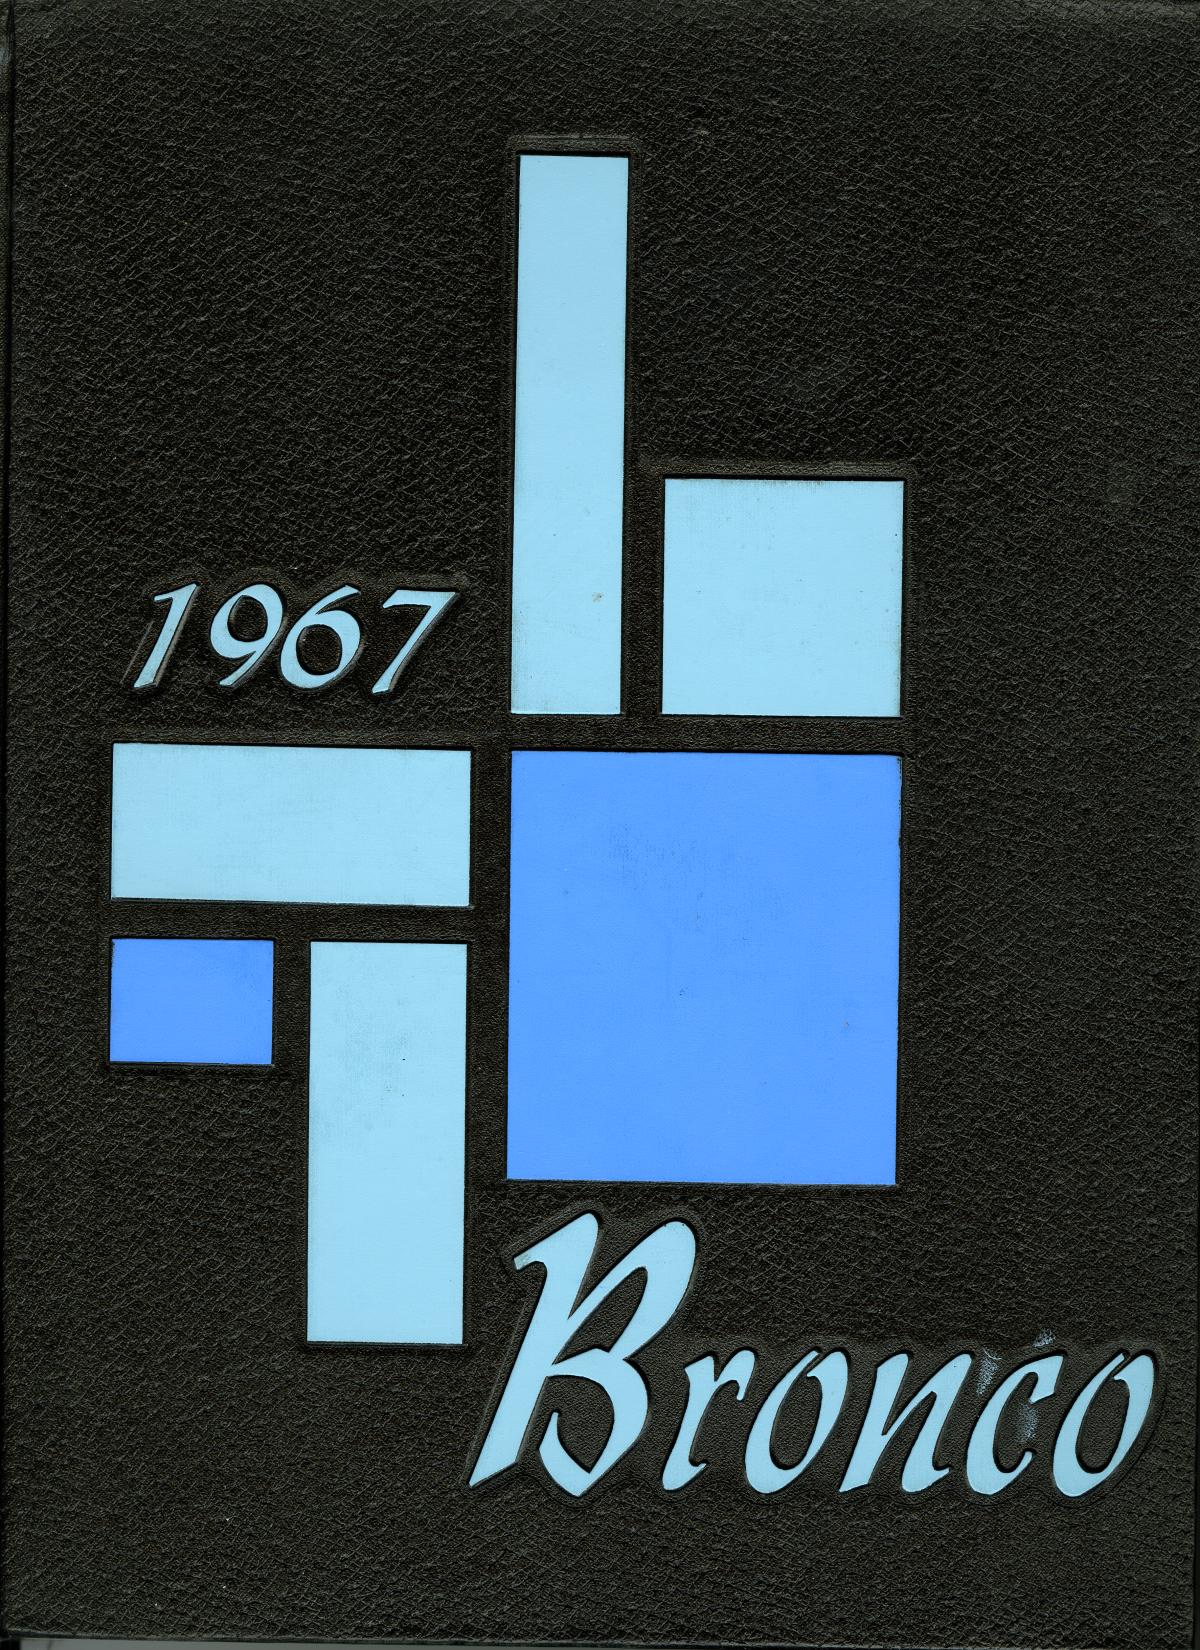 The Bronco, Yearbook of Hardin-Simmons University, 1967
                                                
                                                    Front Cover
                                                